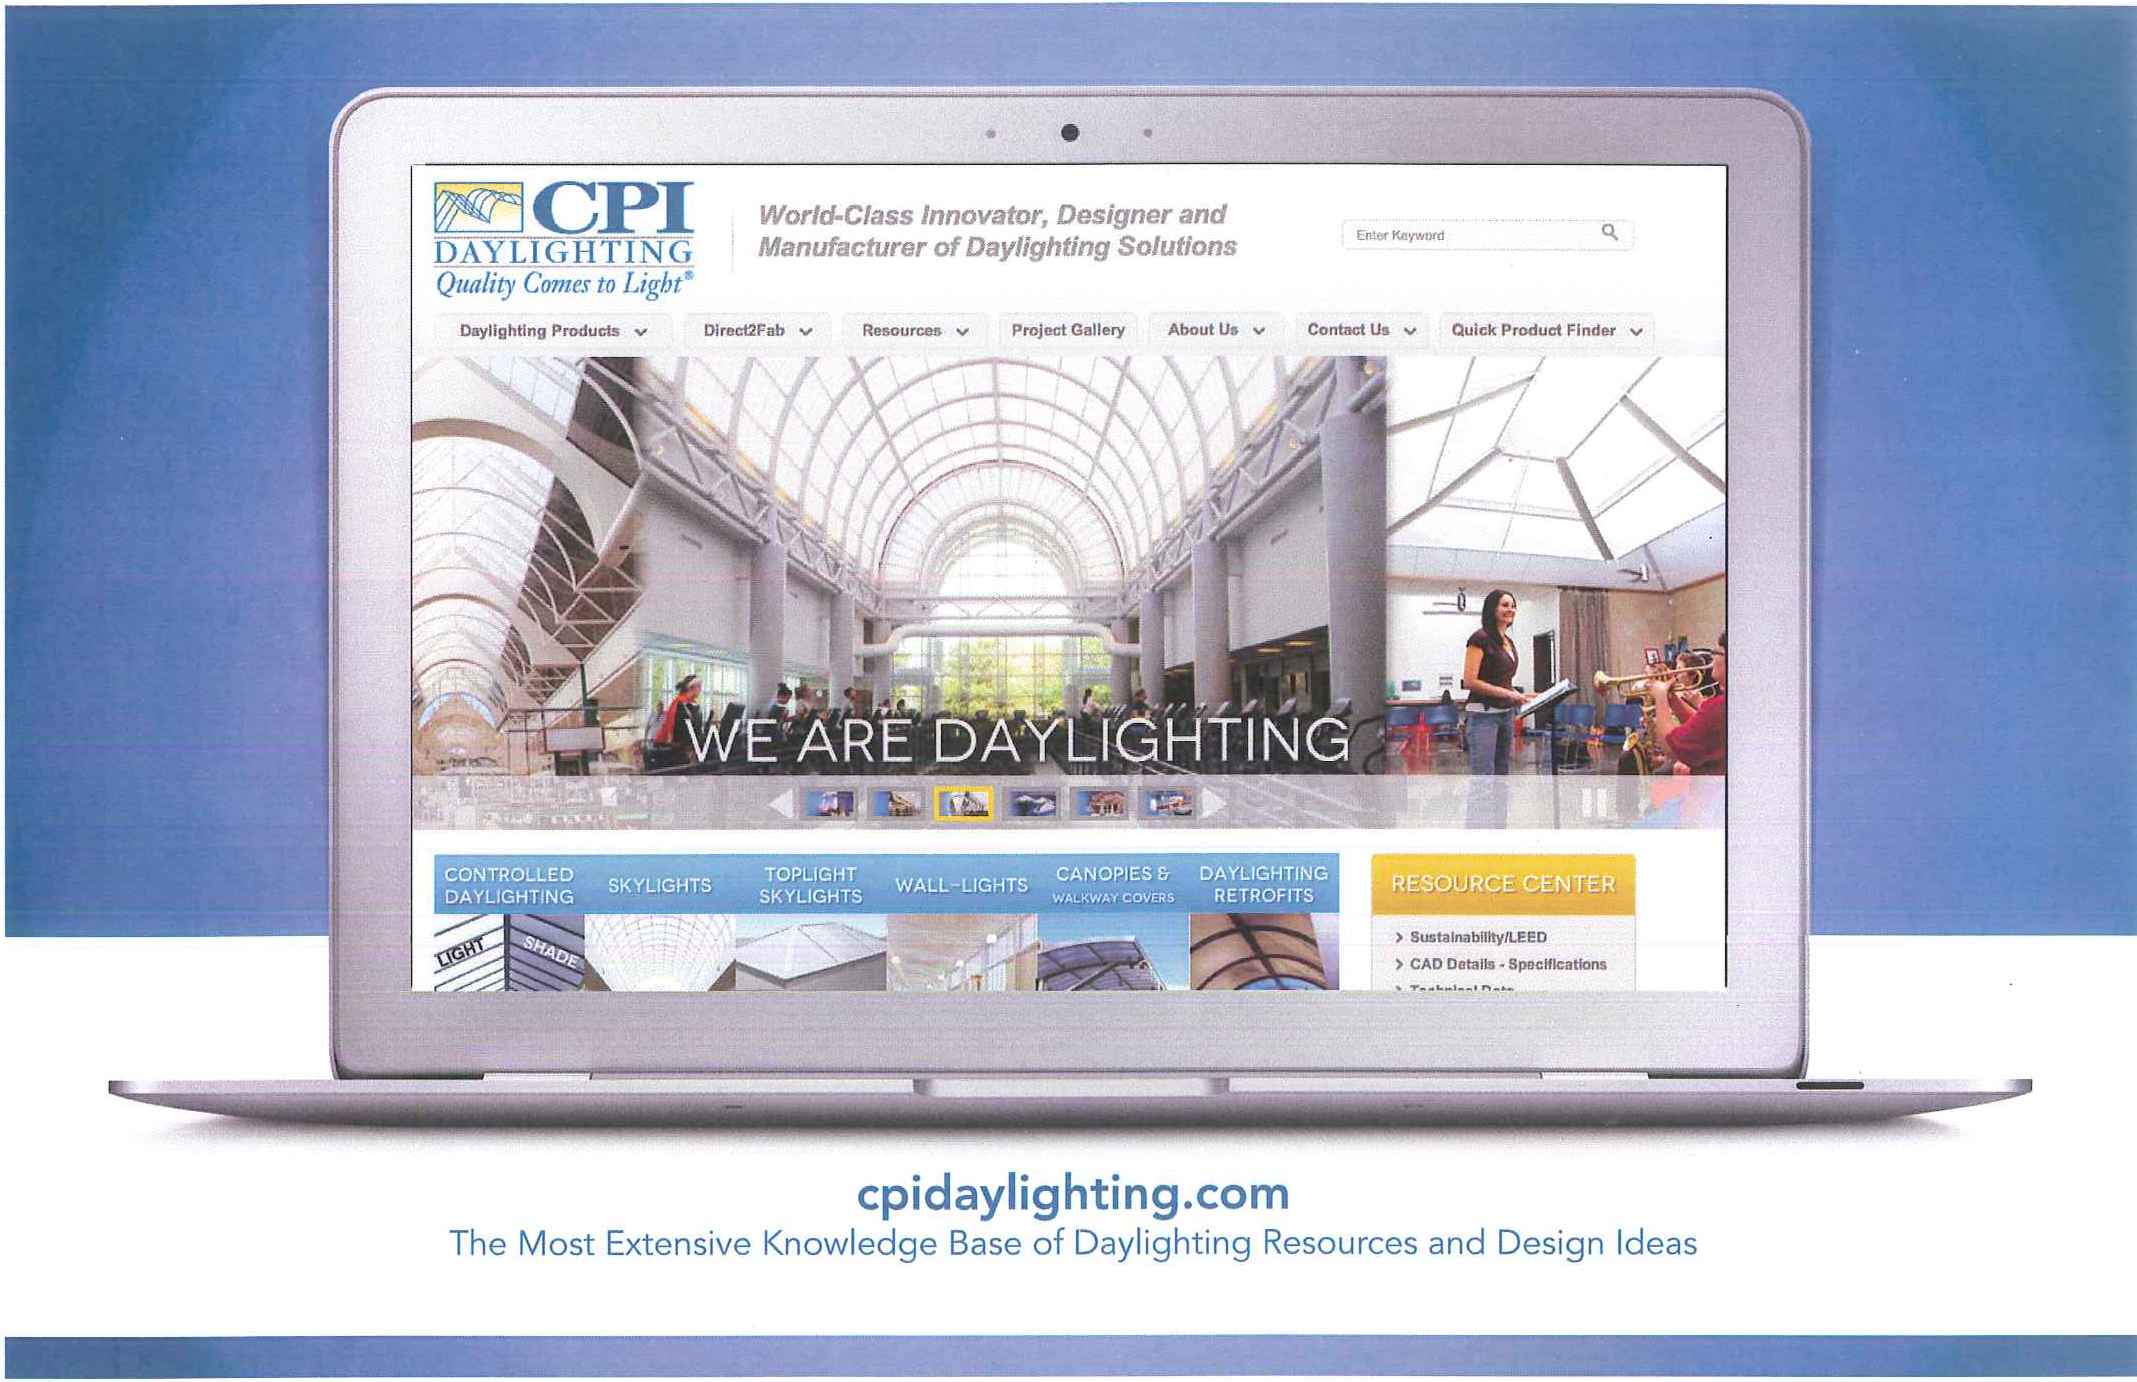 CPI Daylighting releases a new website